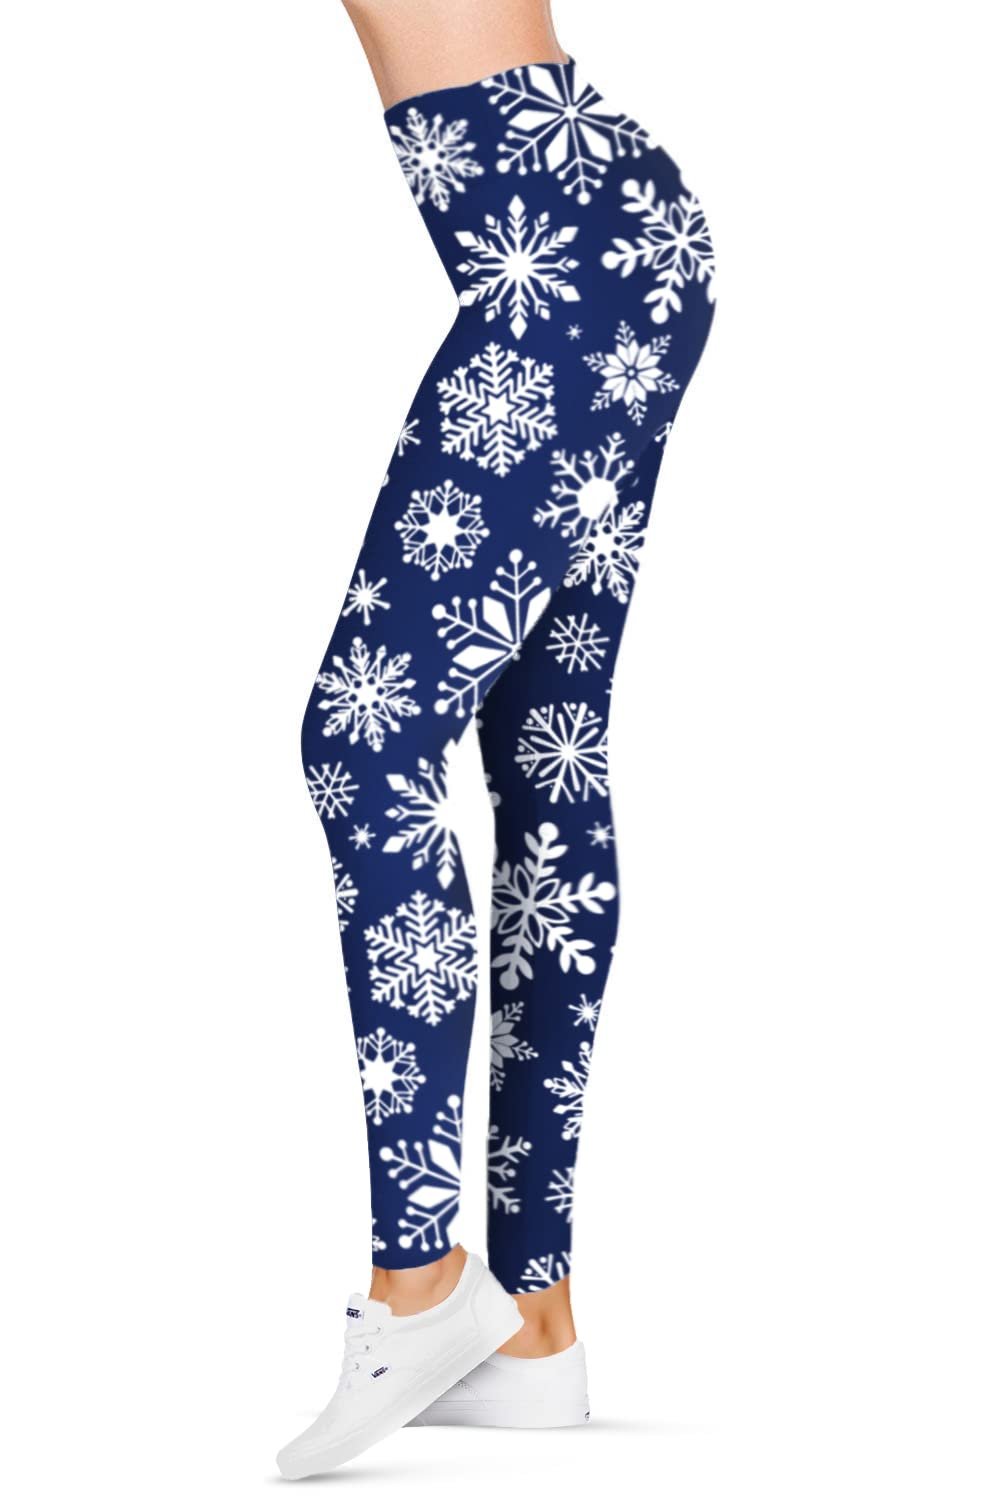 SATINA Womens Christmas Pants - Buttery Soft Highwaisted Holiday Leggings, Blue Snowflake, One Size